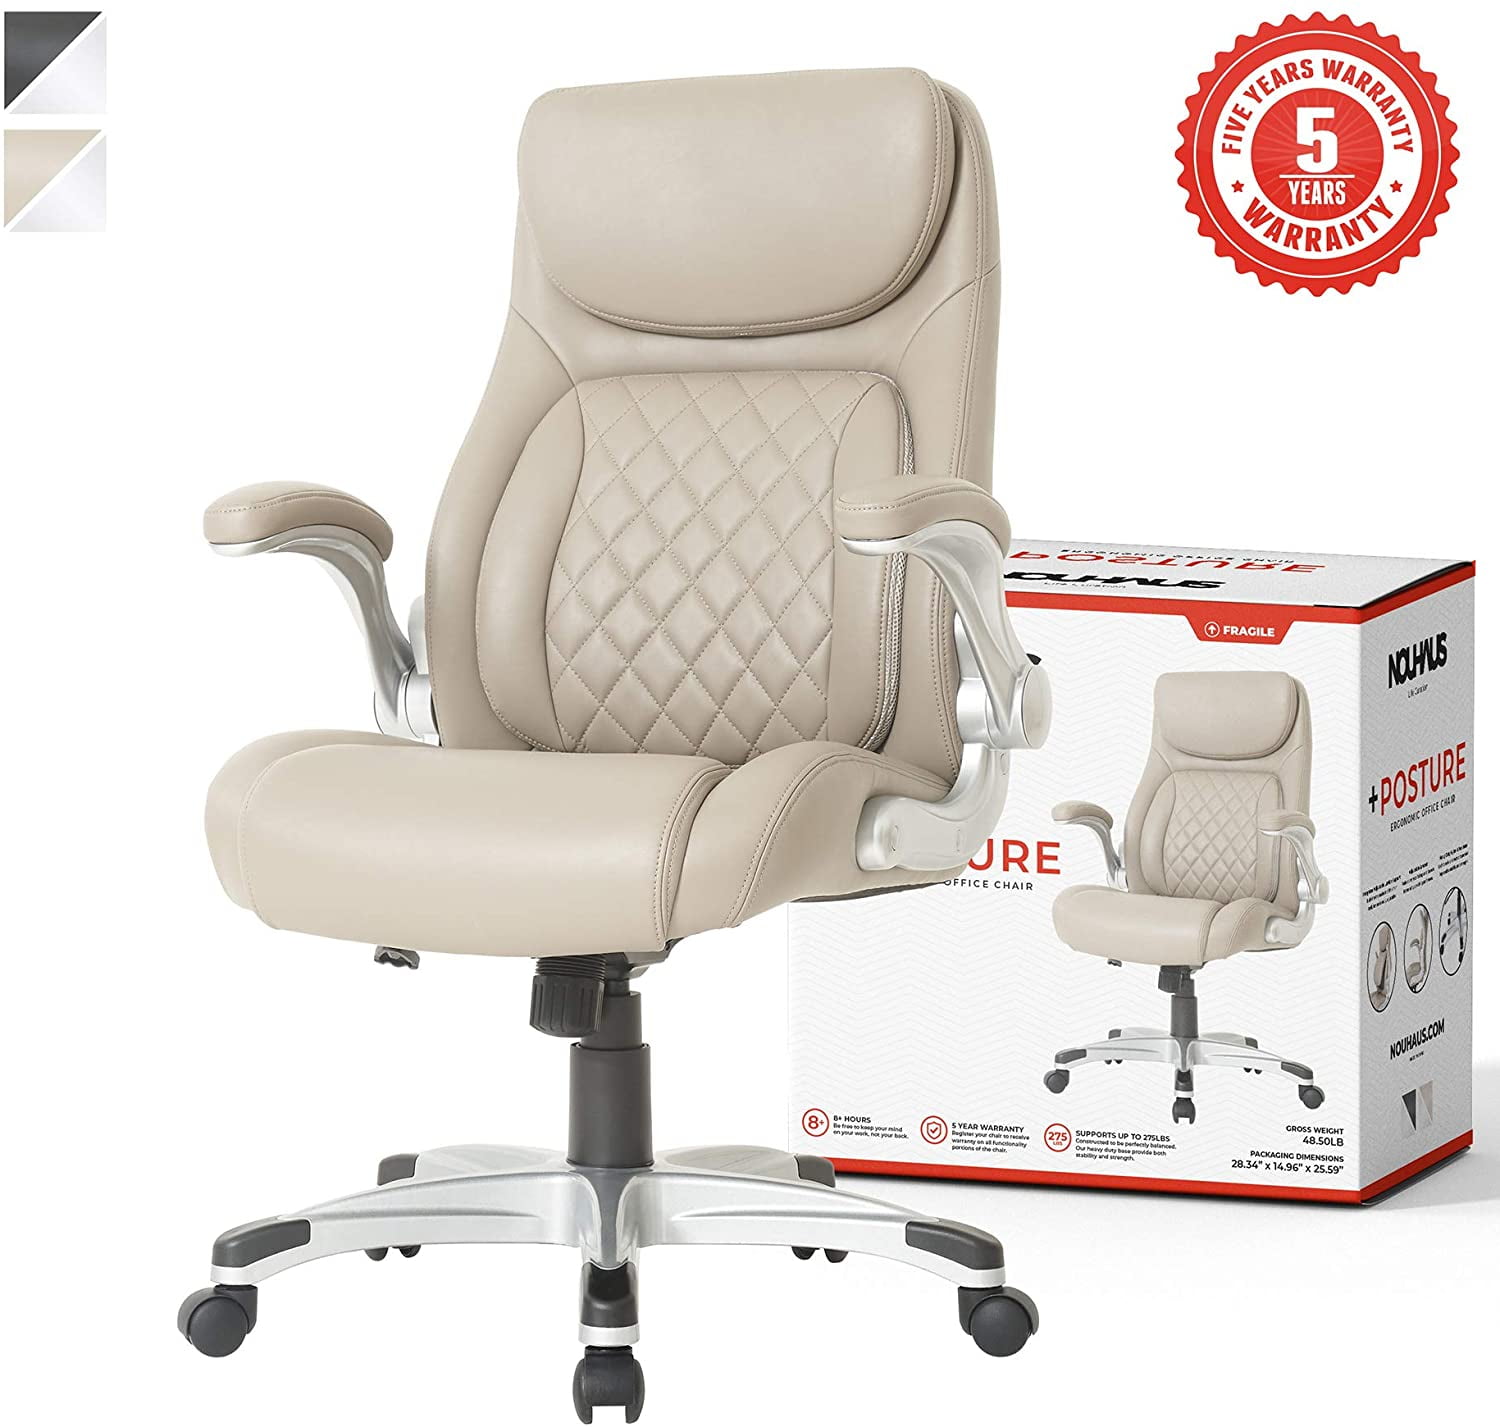 Taupe Modern Executive Chair and Computer Desk Chair NOUHAUS +Posture Ergonomic PU Leather Office Chair Click5 Lumbar Support with FlipAdjust Armrests